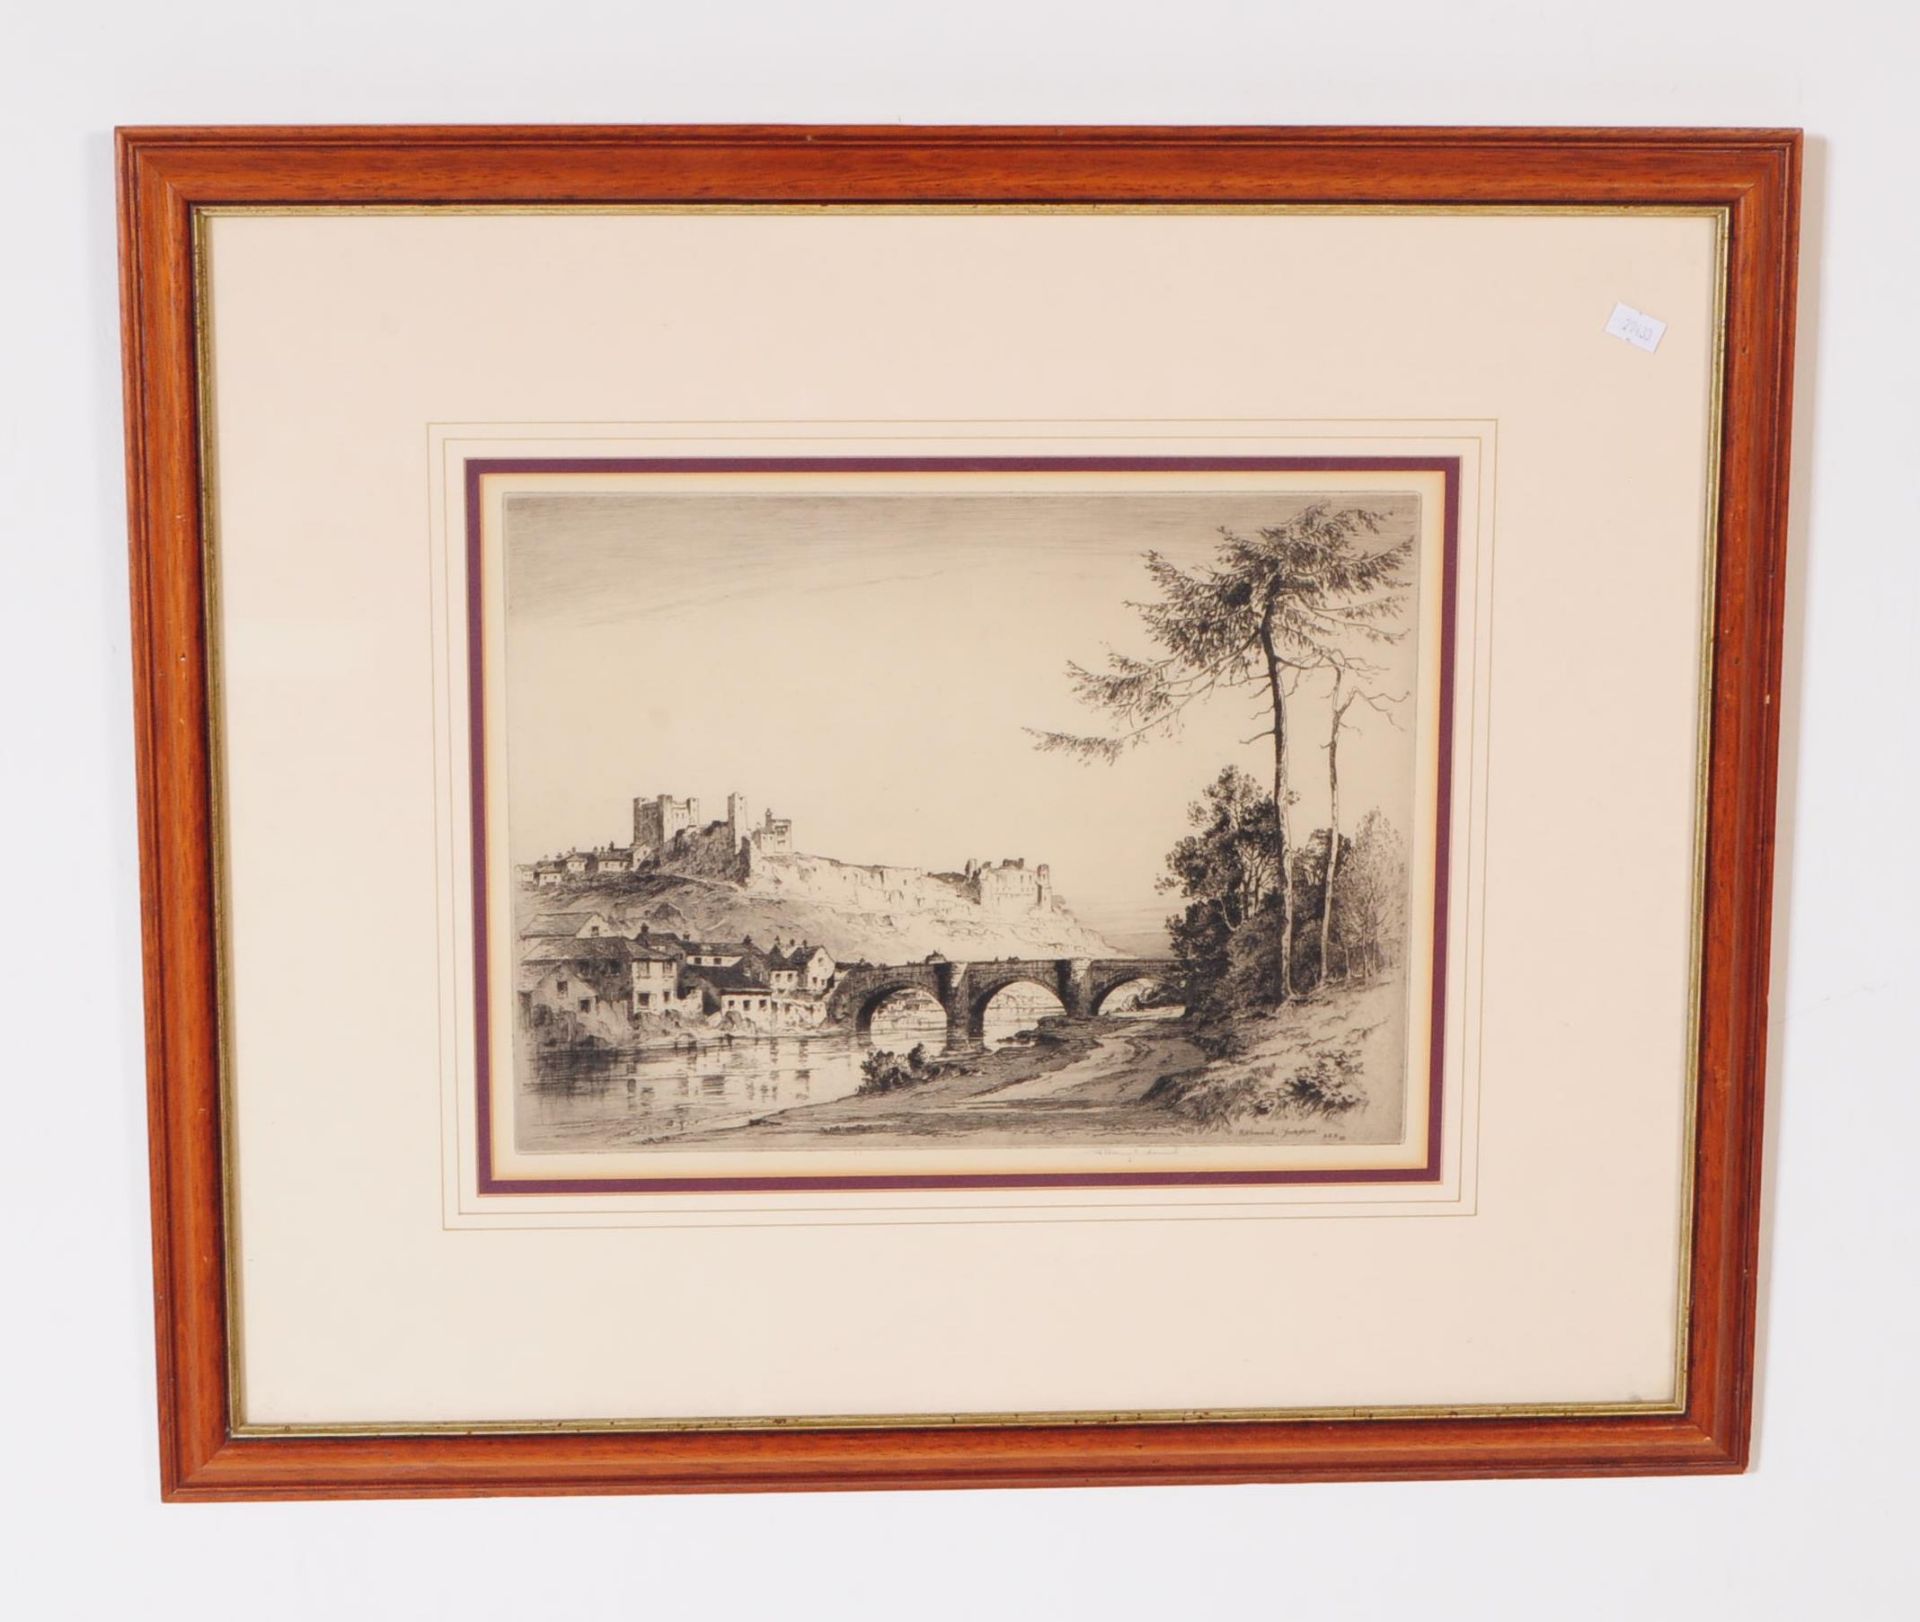 A. E. HOWARTH - ORIGINAL VINTAGE 20TH CENTURY ETCHING